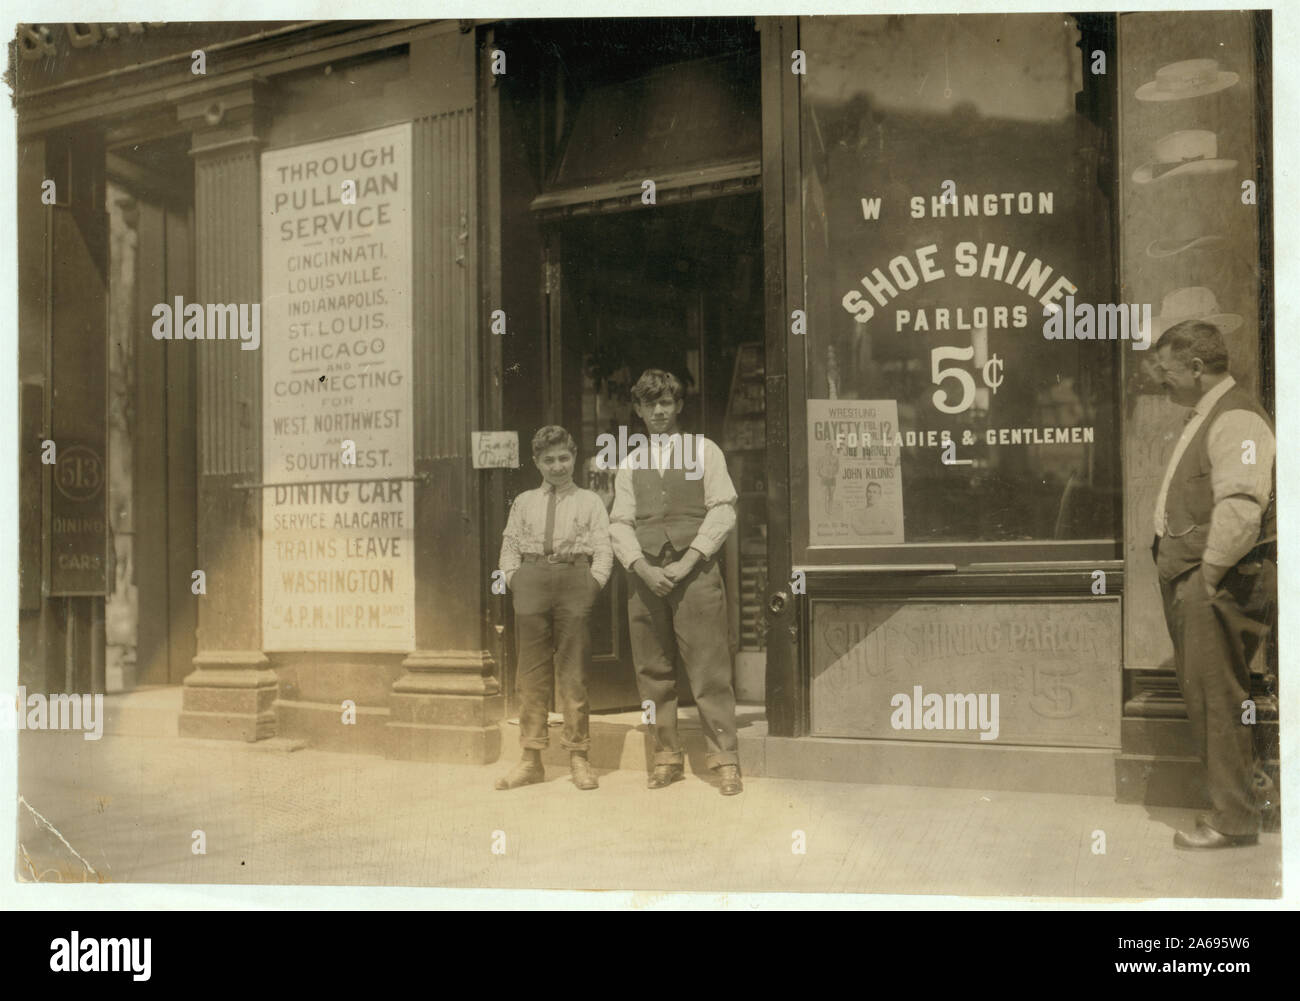 Young boy is Ciriakos Keiradimos, a young Greek shoe-shiner, working in shop at 511 Penn. Ave., N.W., Washington, D.C. Said to be 16 yrs. old, but is absolutely illiterate. Has been in this country only 2 months. Works until 9 P.M. every day and until 11 P.M. Saturdays. Abstract: Photographs from the records of the National Child Labor Committee (U.S.) Stock Photo